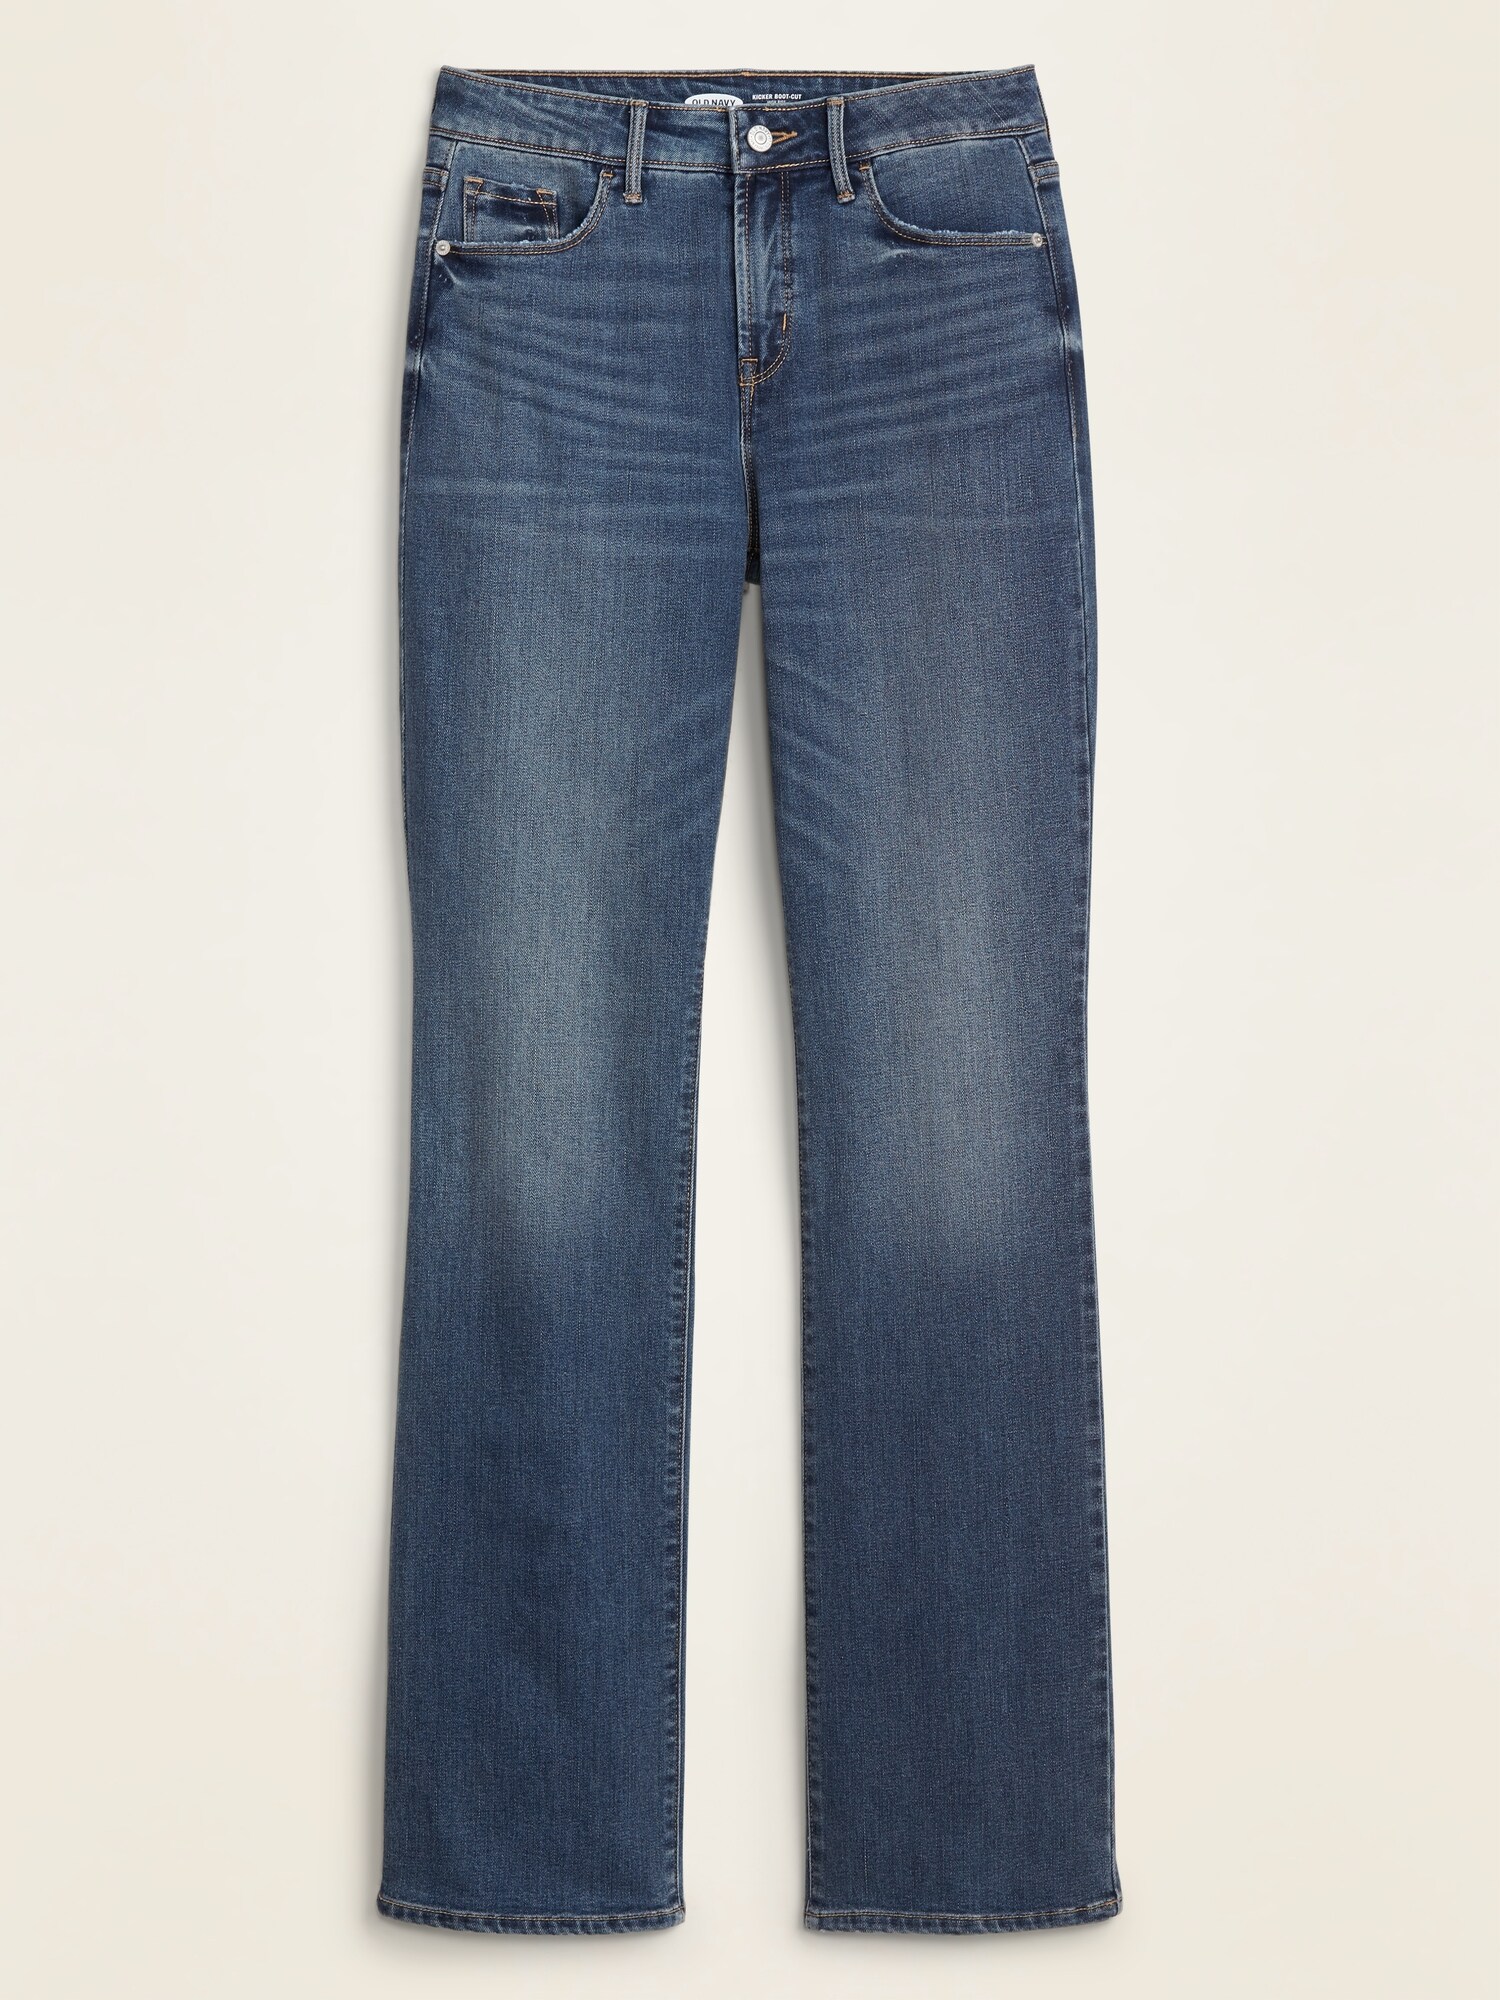 old navy curvy boot cut jeans